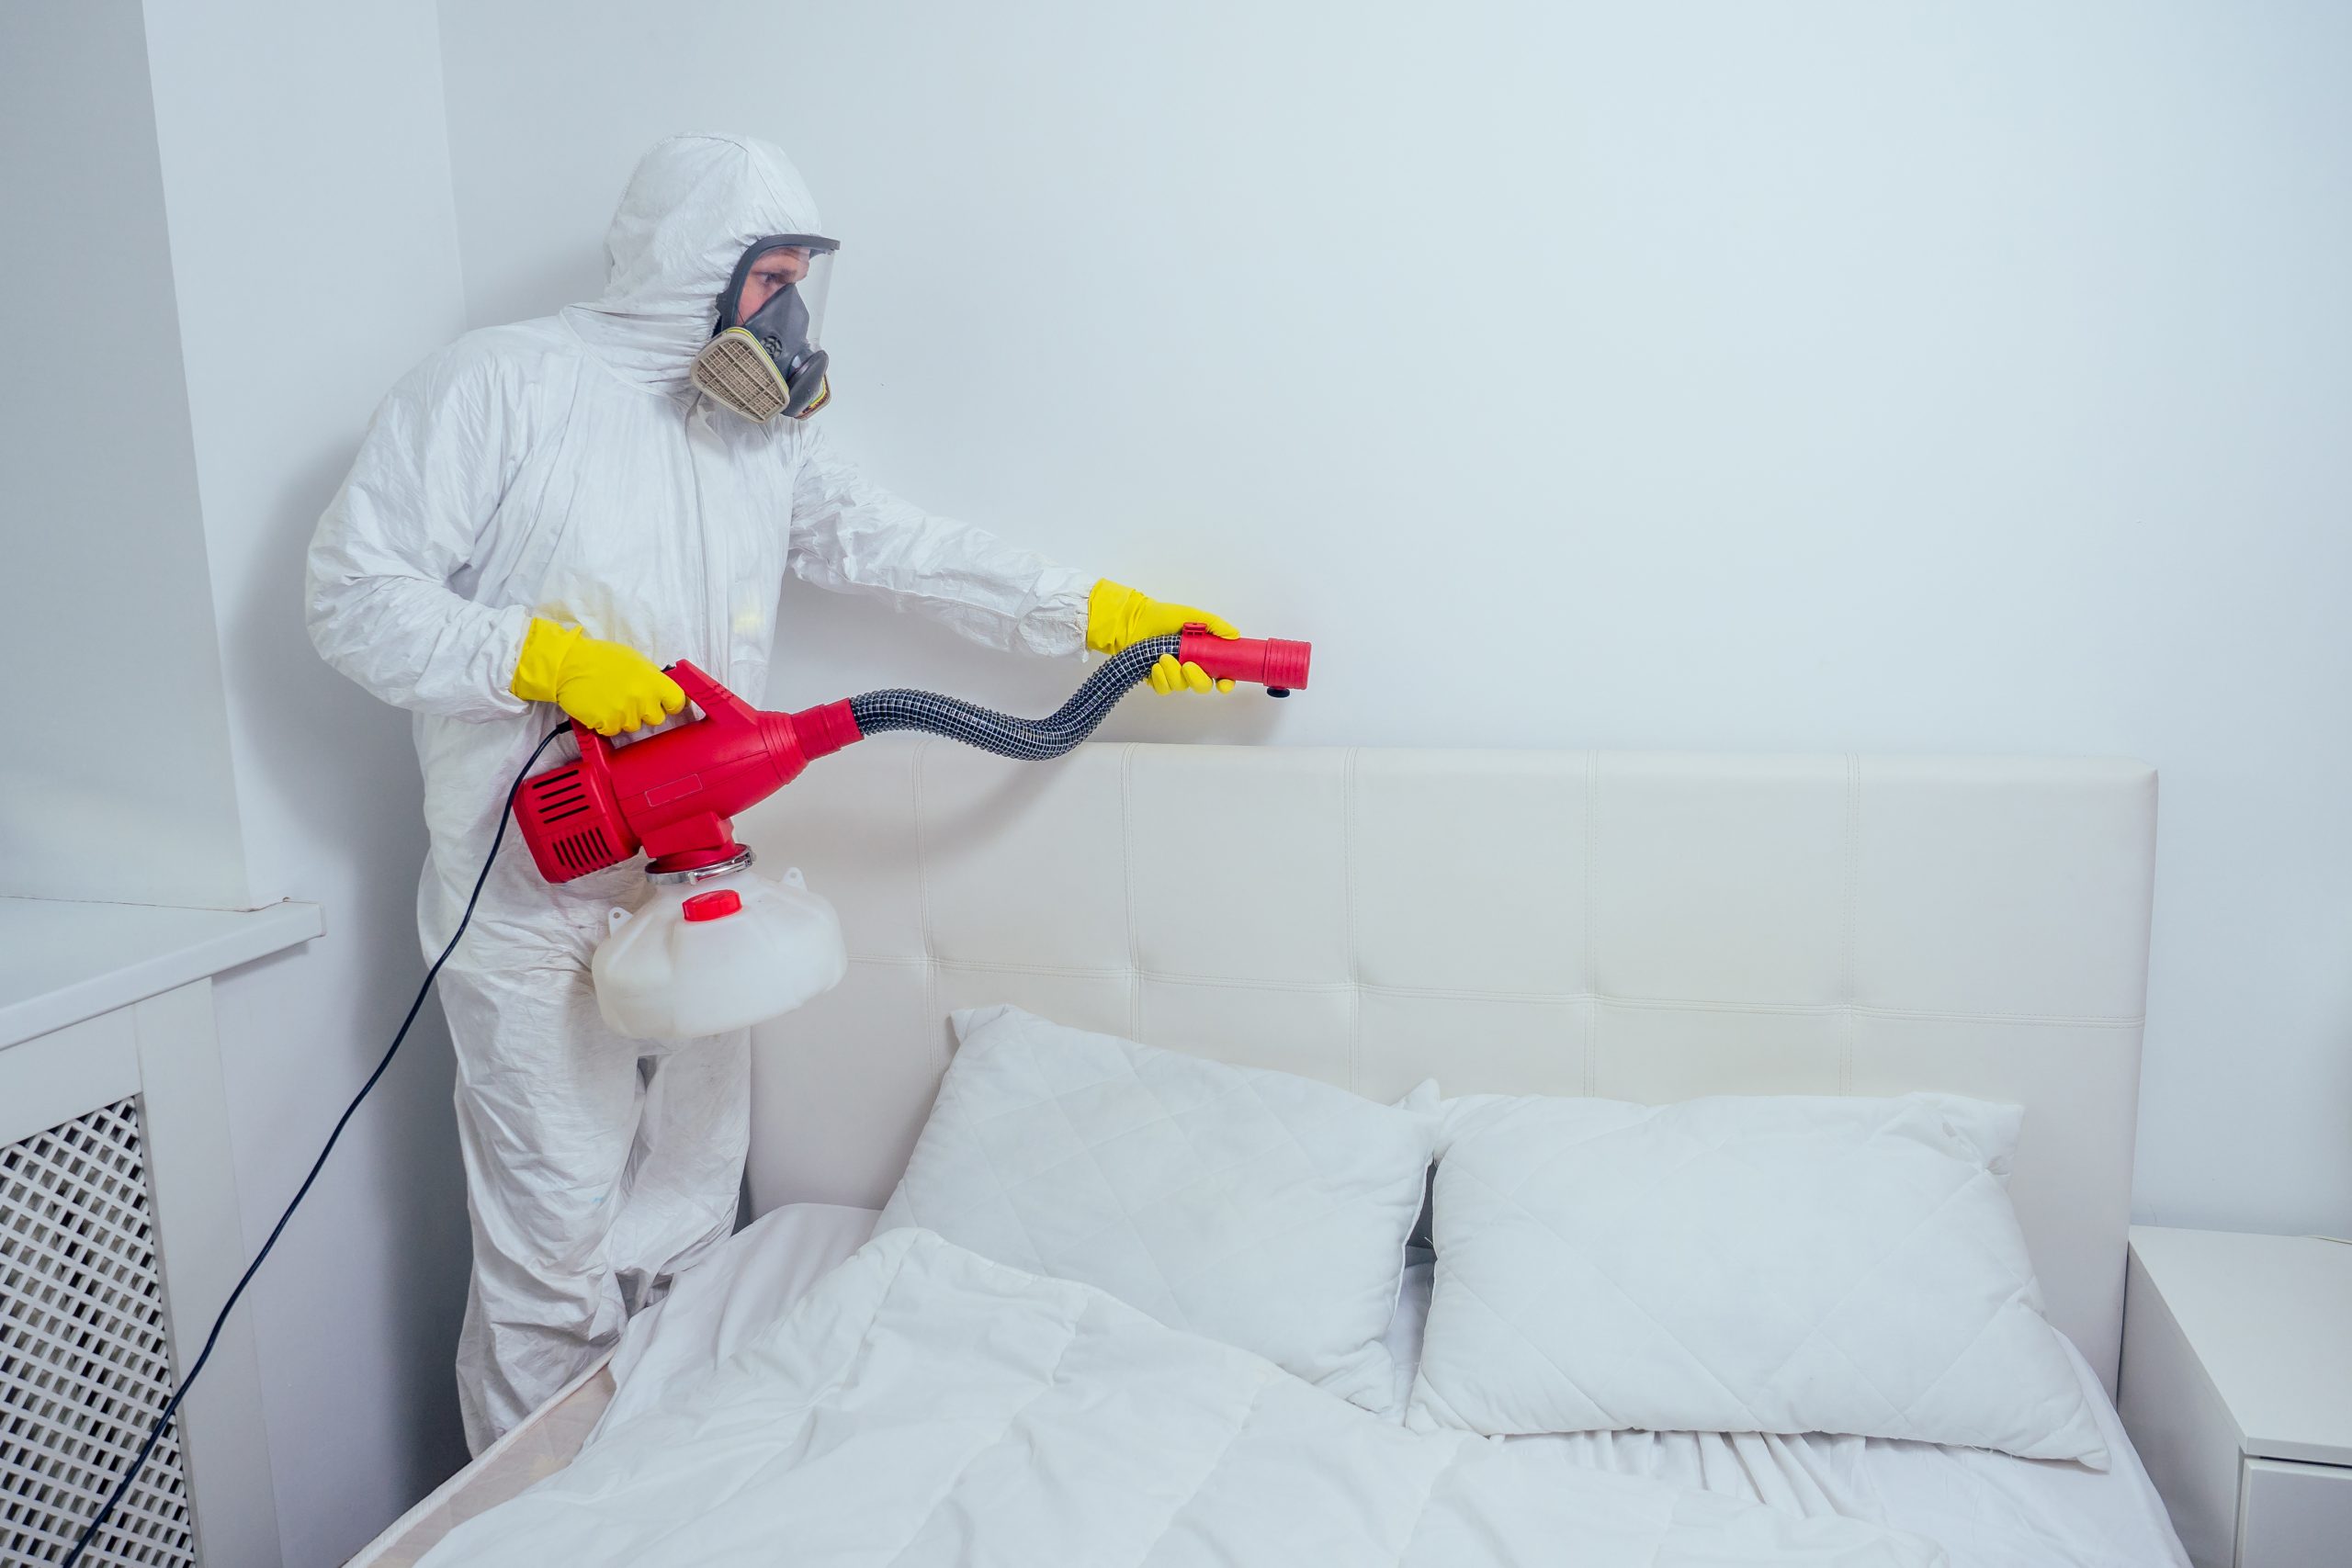 pest control worker lying on floor and spraying pesticides in bedroom.